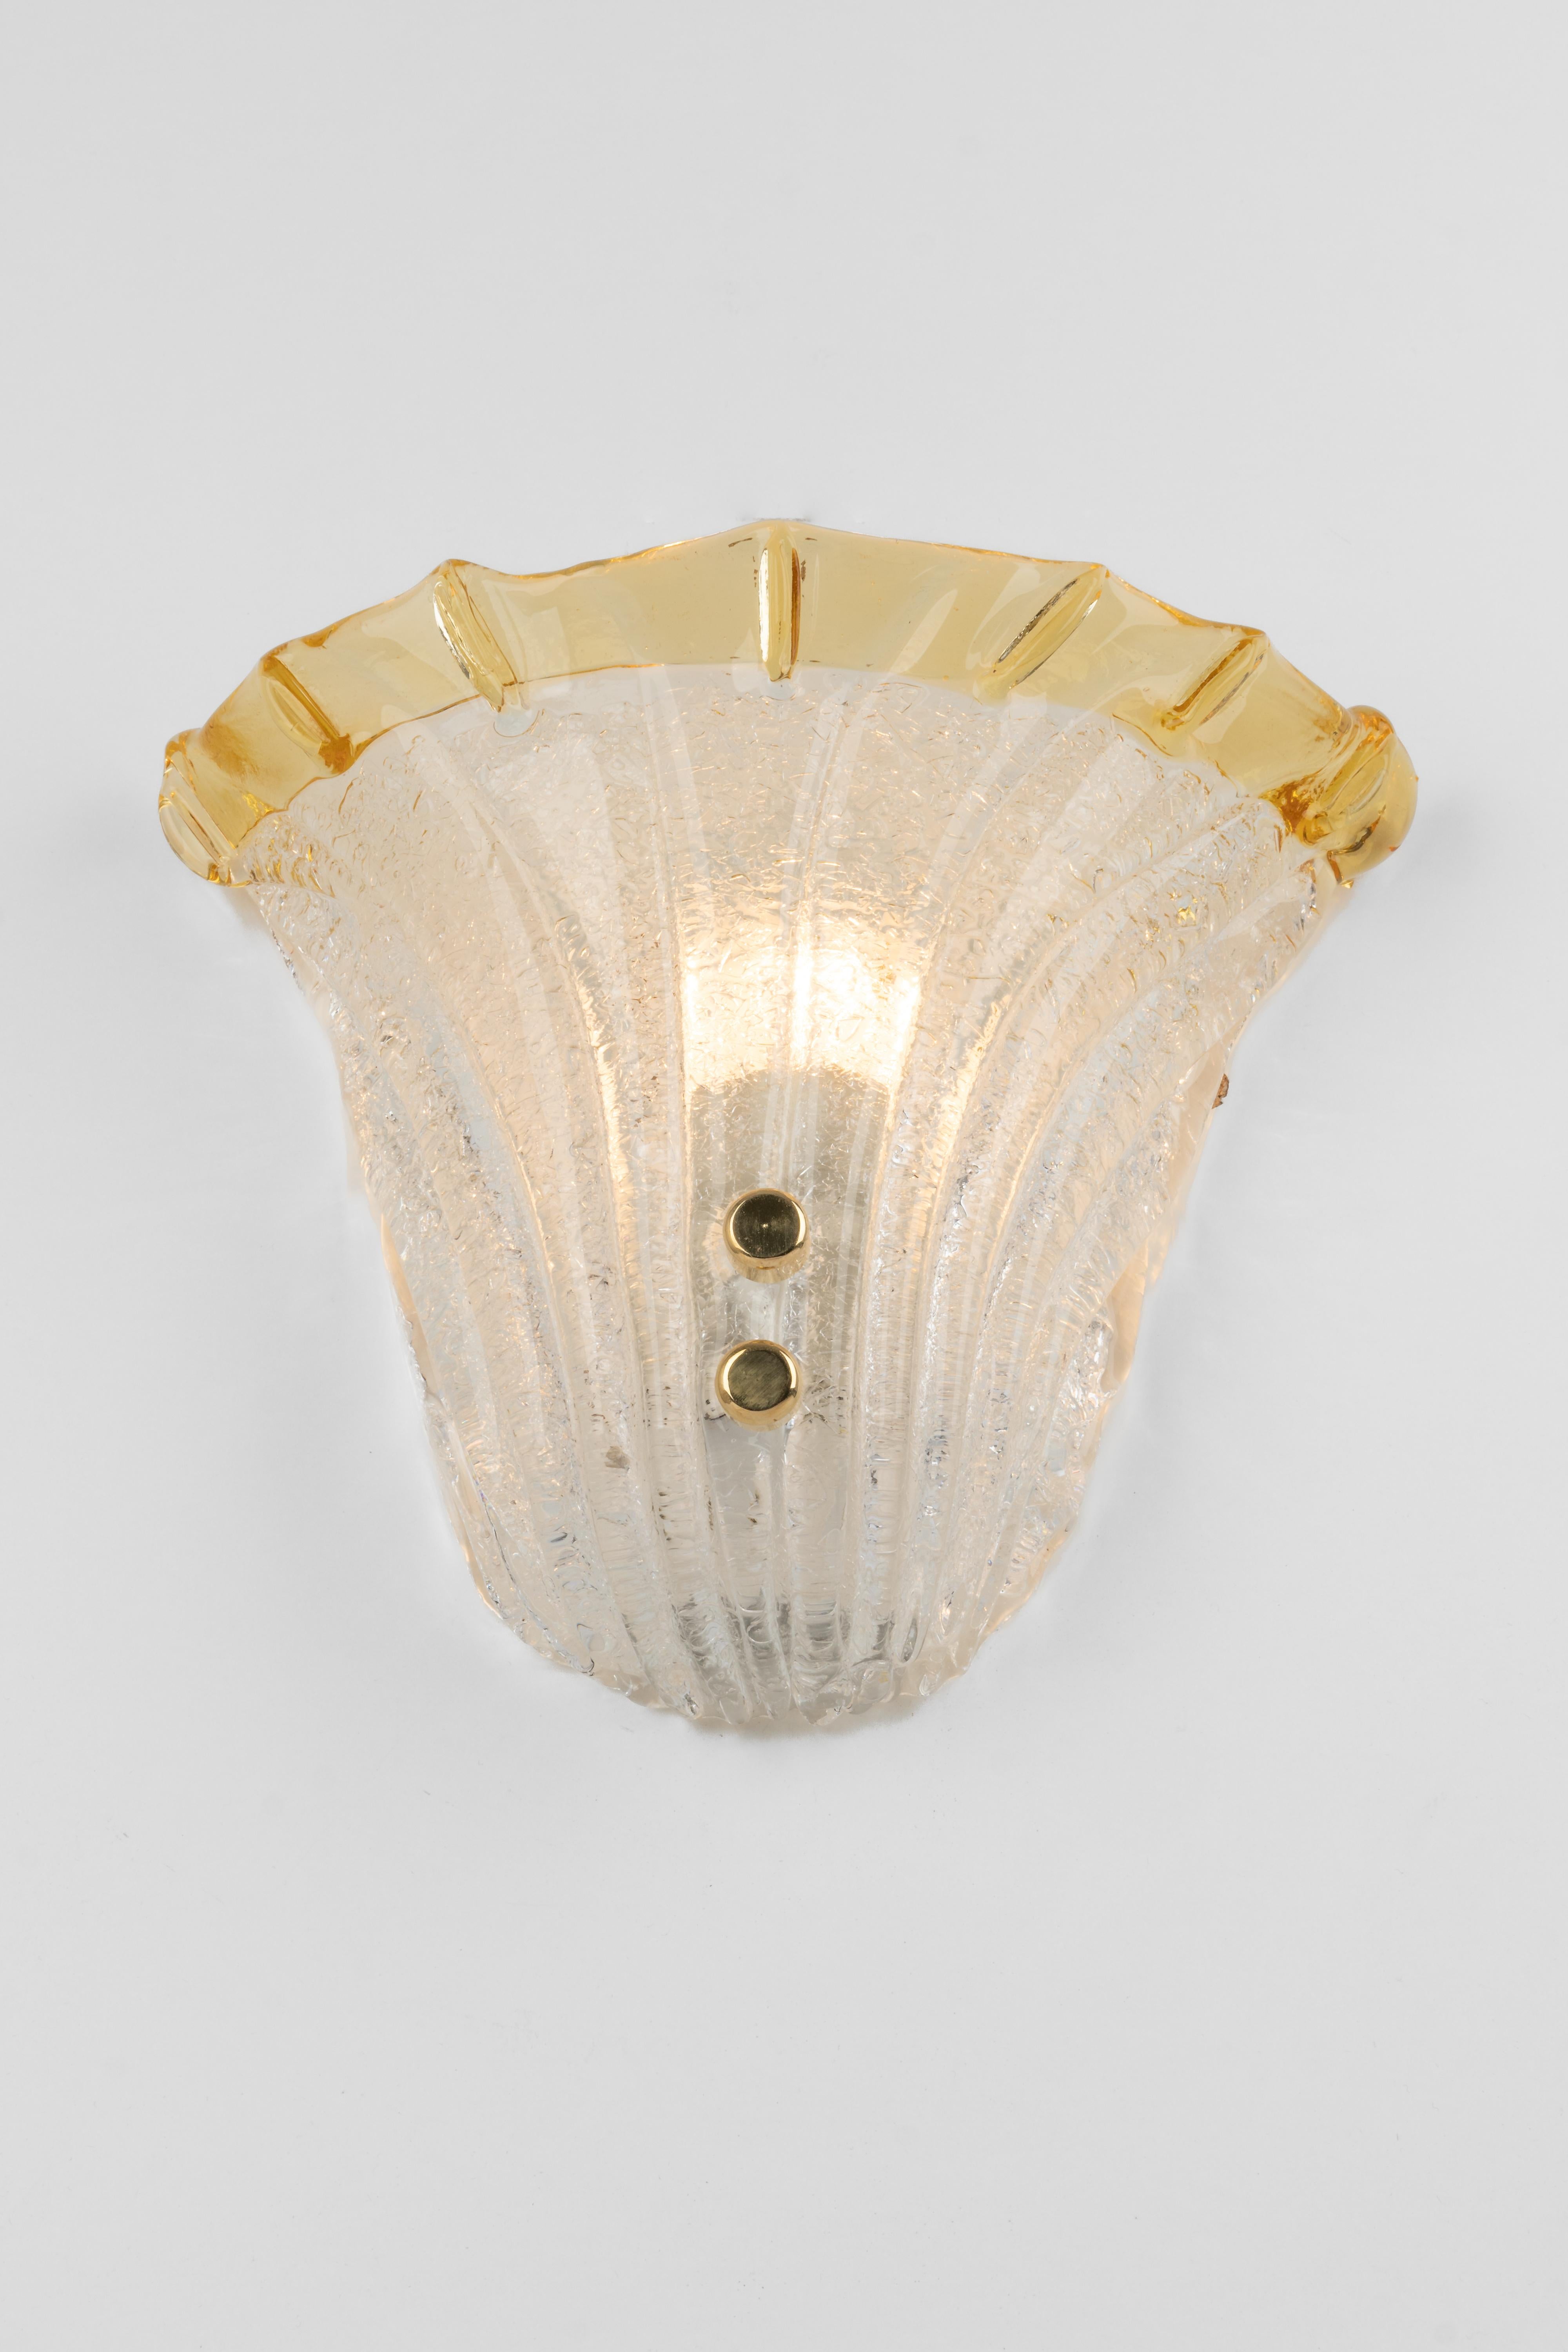 Mid-Century Modern Pair of Murano Glass Wall Light in Venini Style, Italy, 1970s For Sale